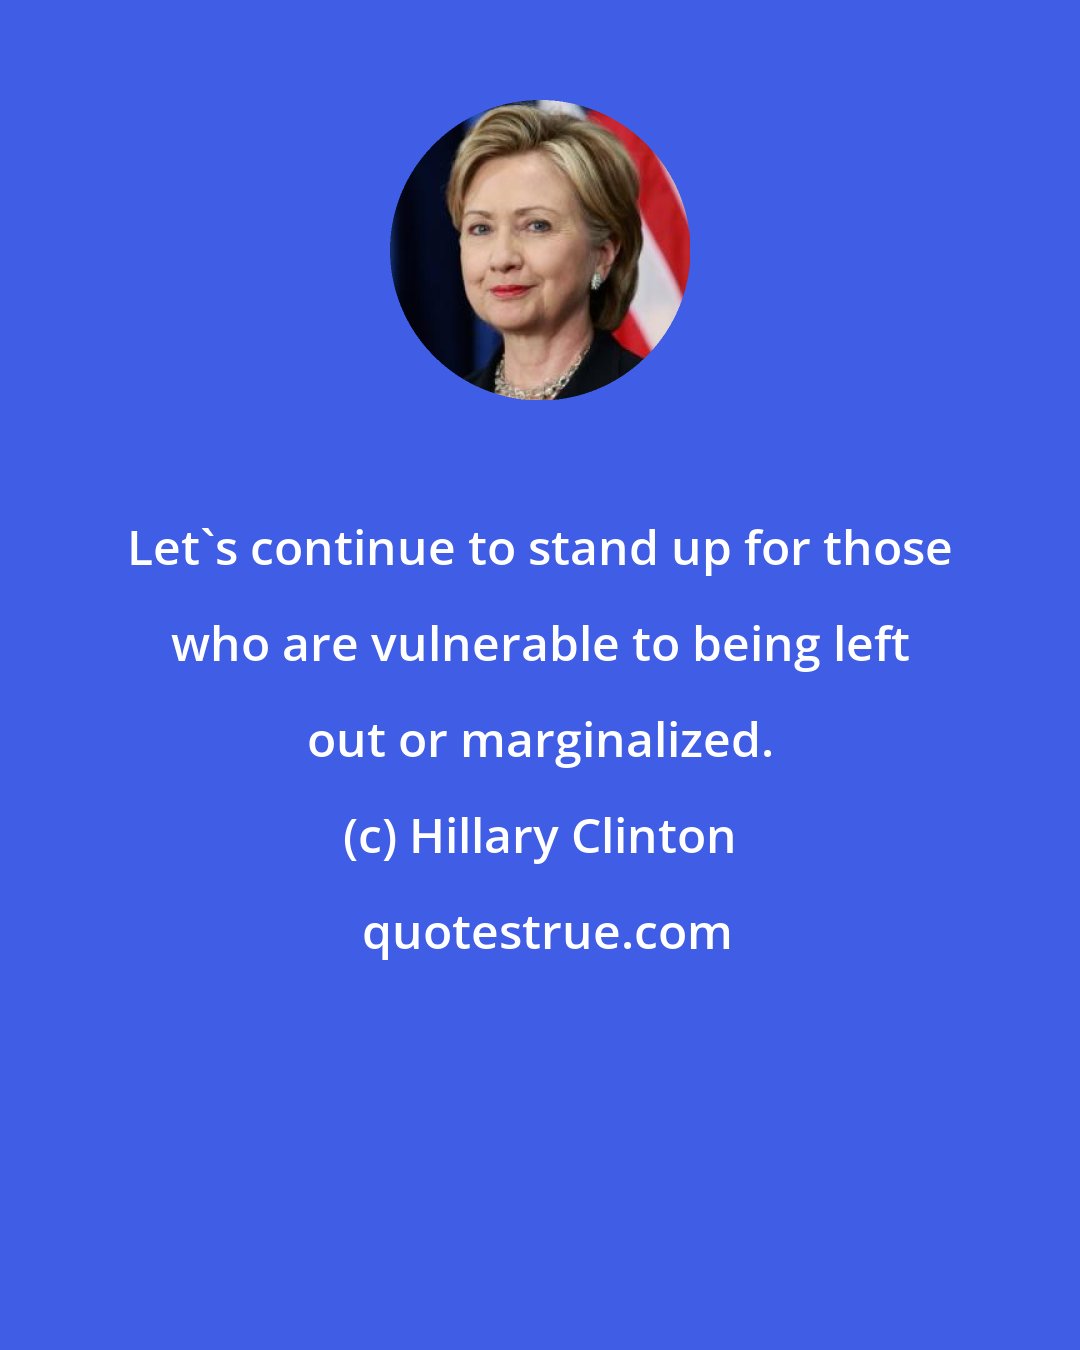 Hillary Clinton: Let's continue to stand up for those who are vulnerable to being left out or marginalized.